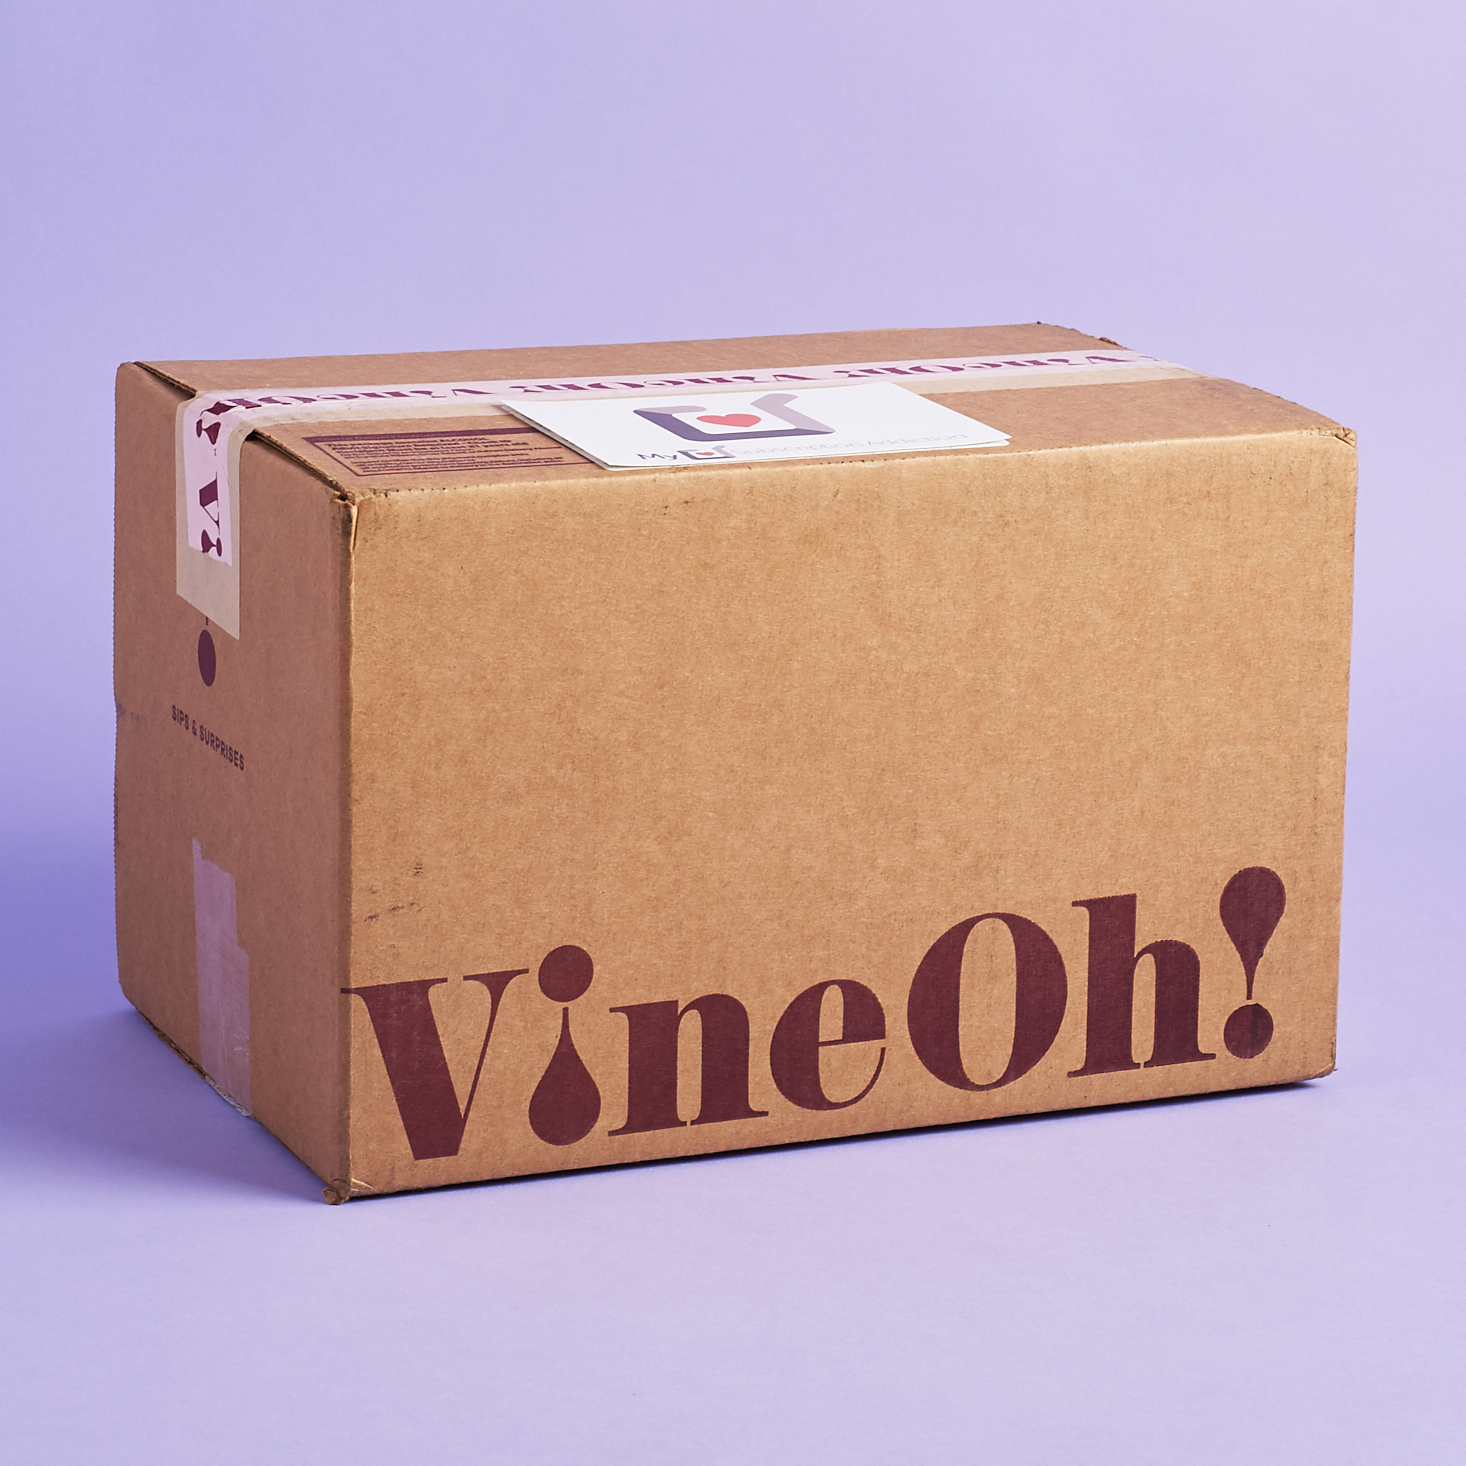 Vine Oh! “Oh! For Me!” Review + Coupon – Fall 2019